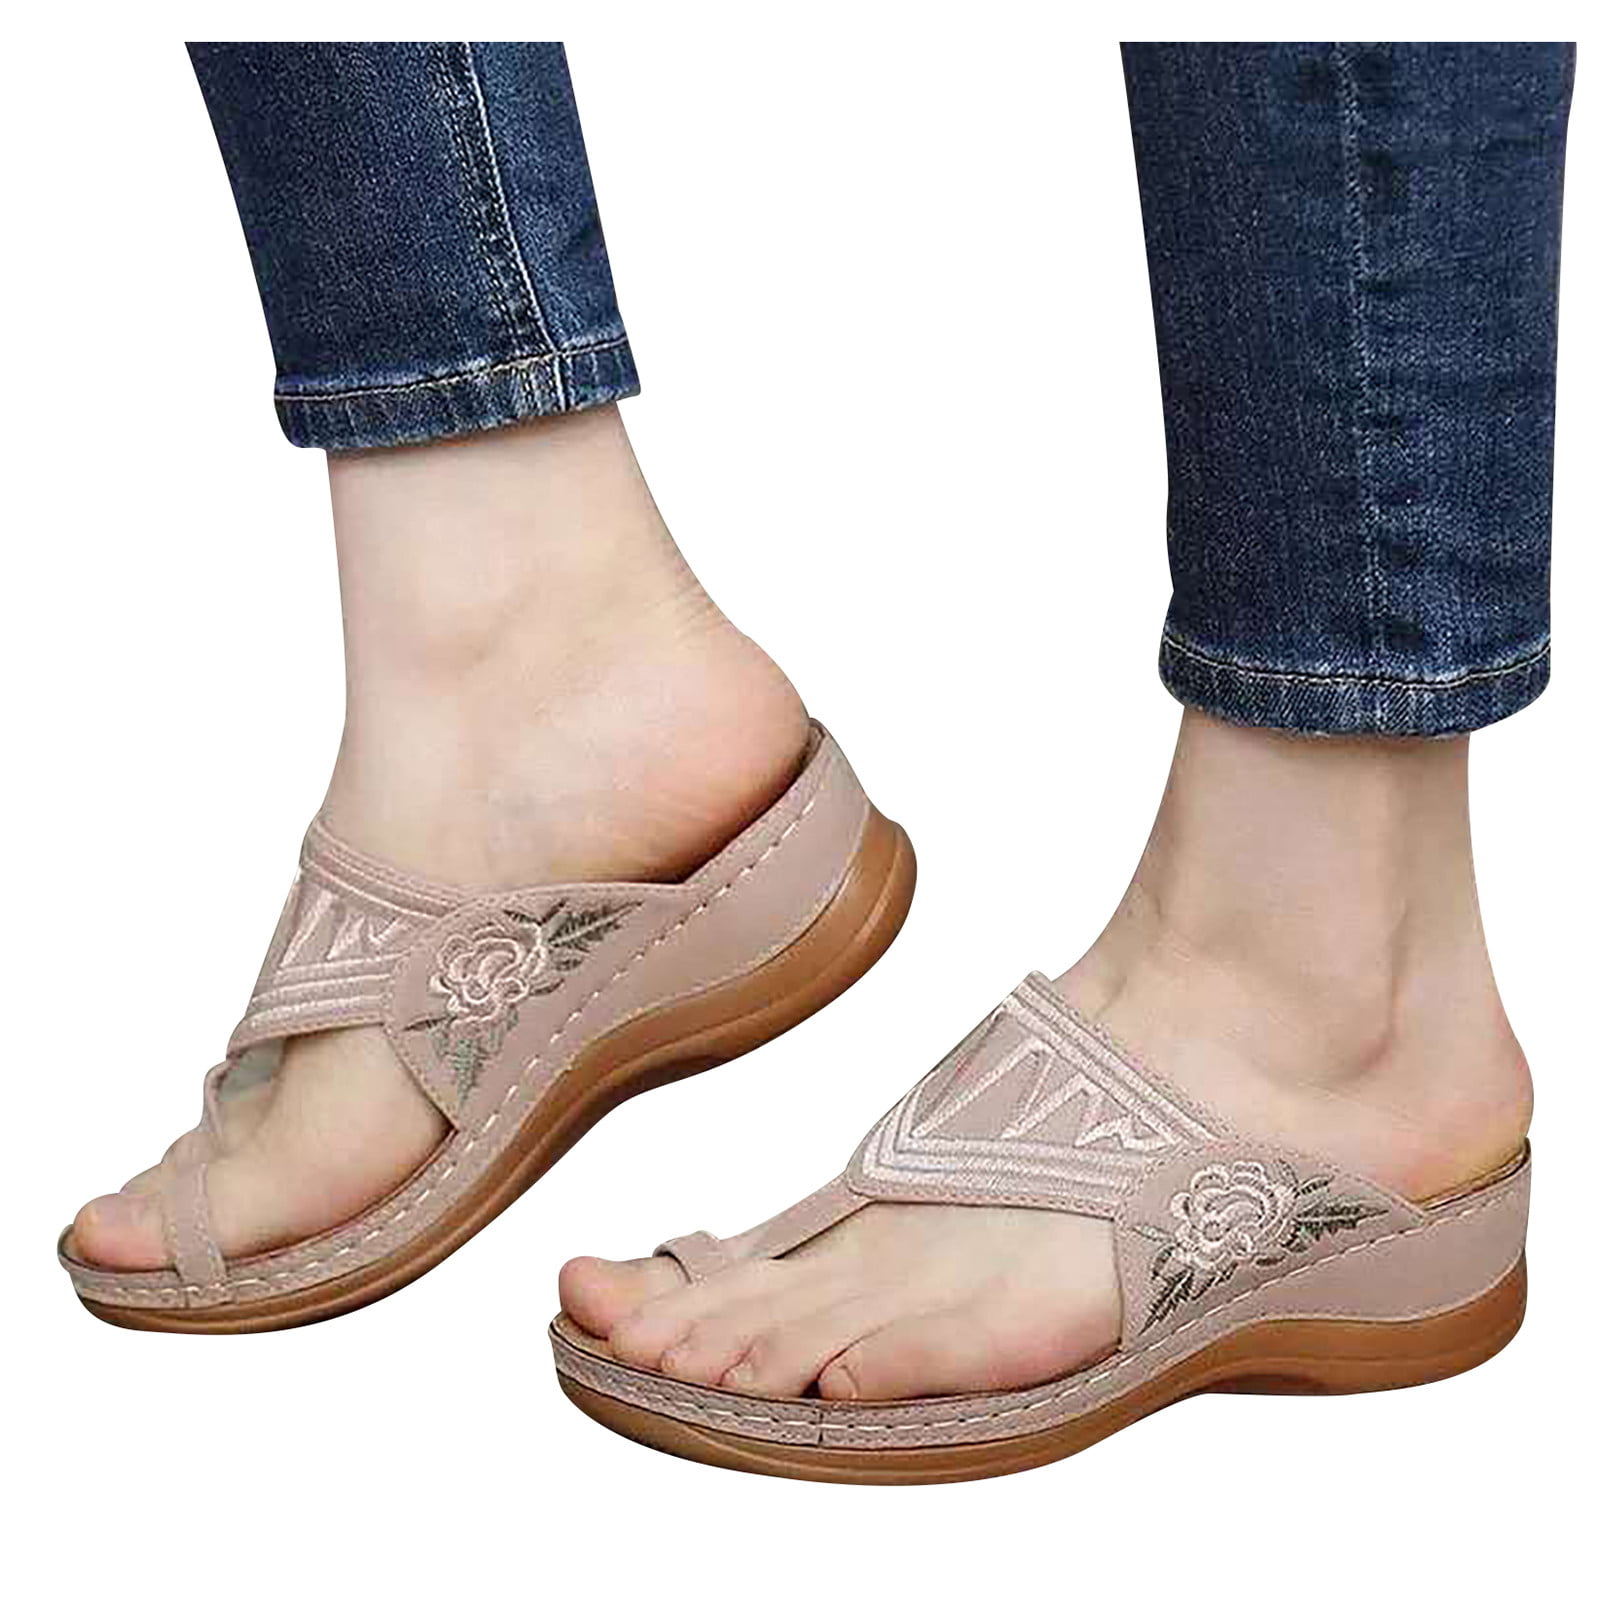 Details about   Large Size Sandals Flat Bottoms Beach All-match Buttons Slippers Women's Shoes U